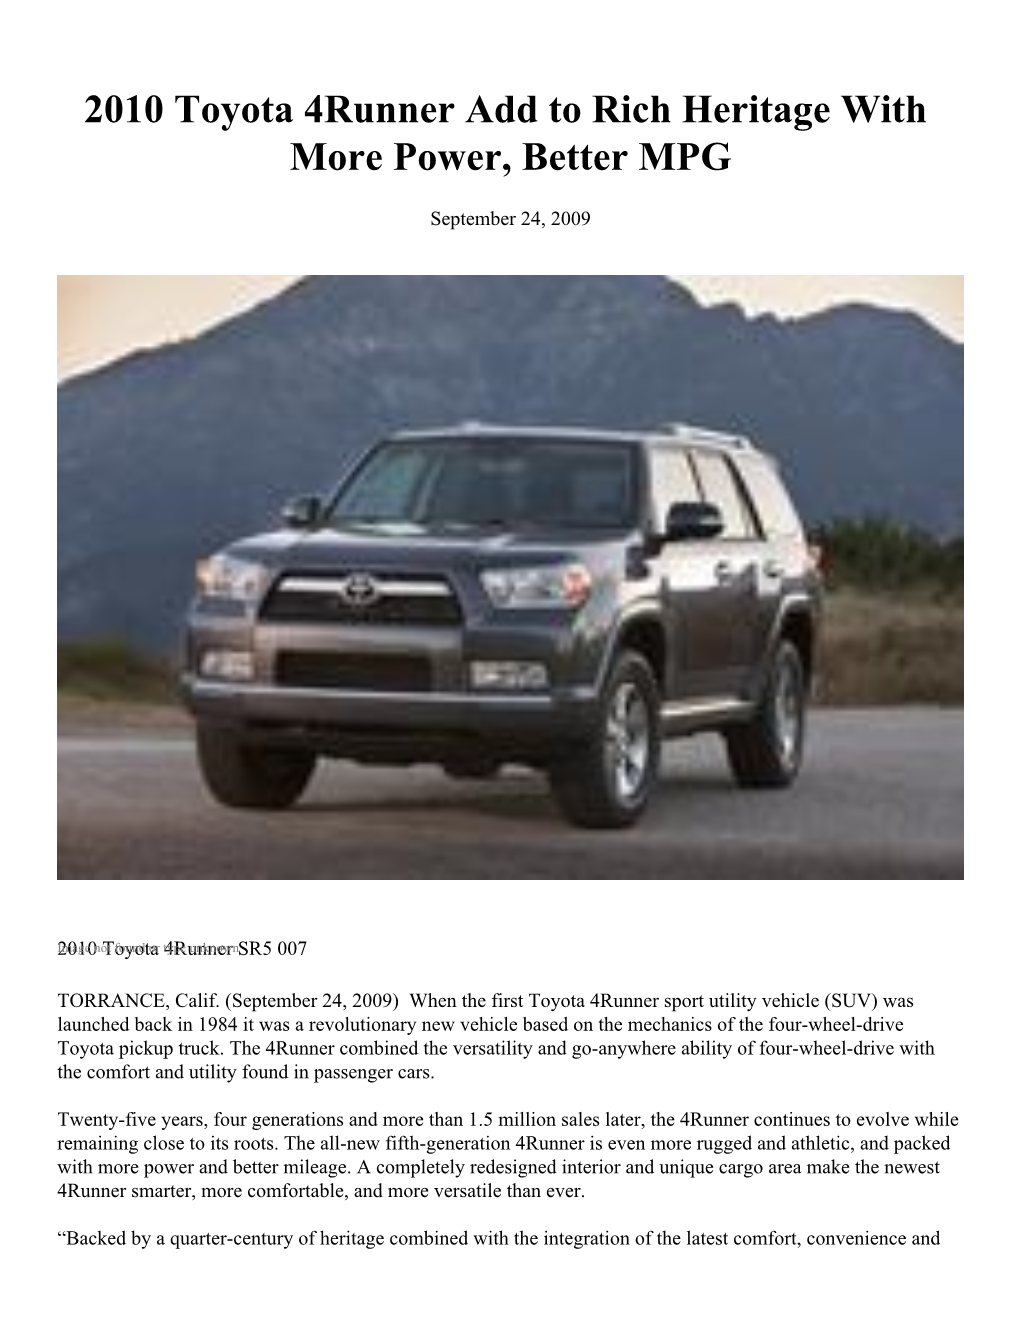 2010 Toyota 4Runner Add to Rich Heritage with More Power, Better MPG